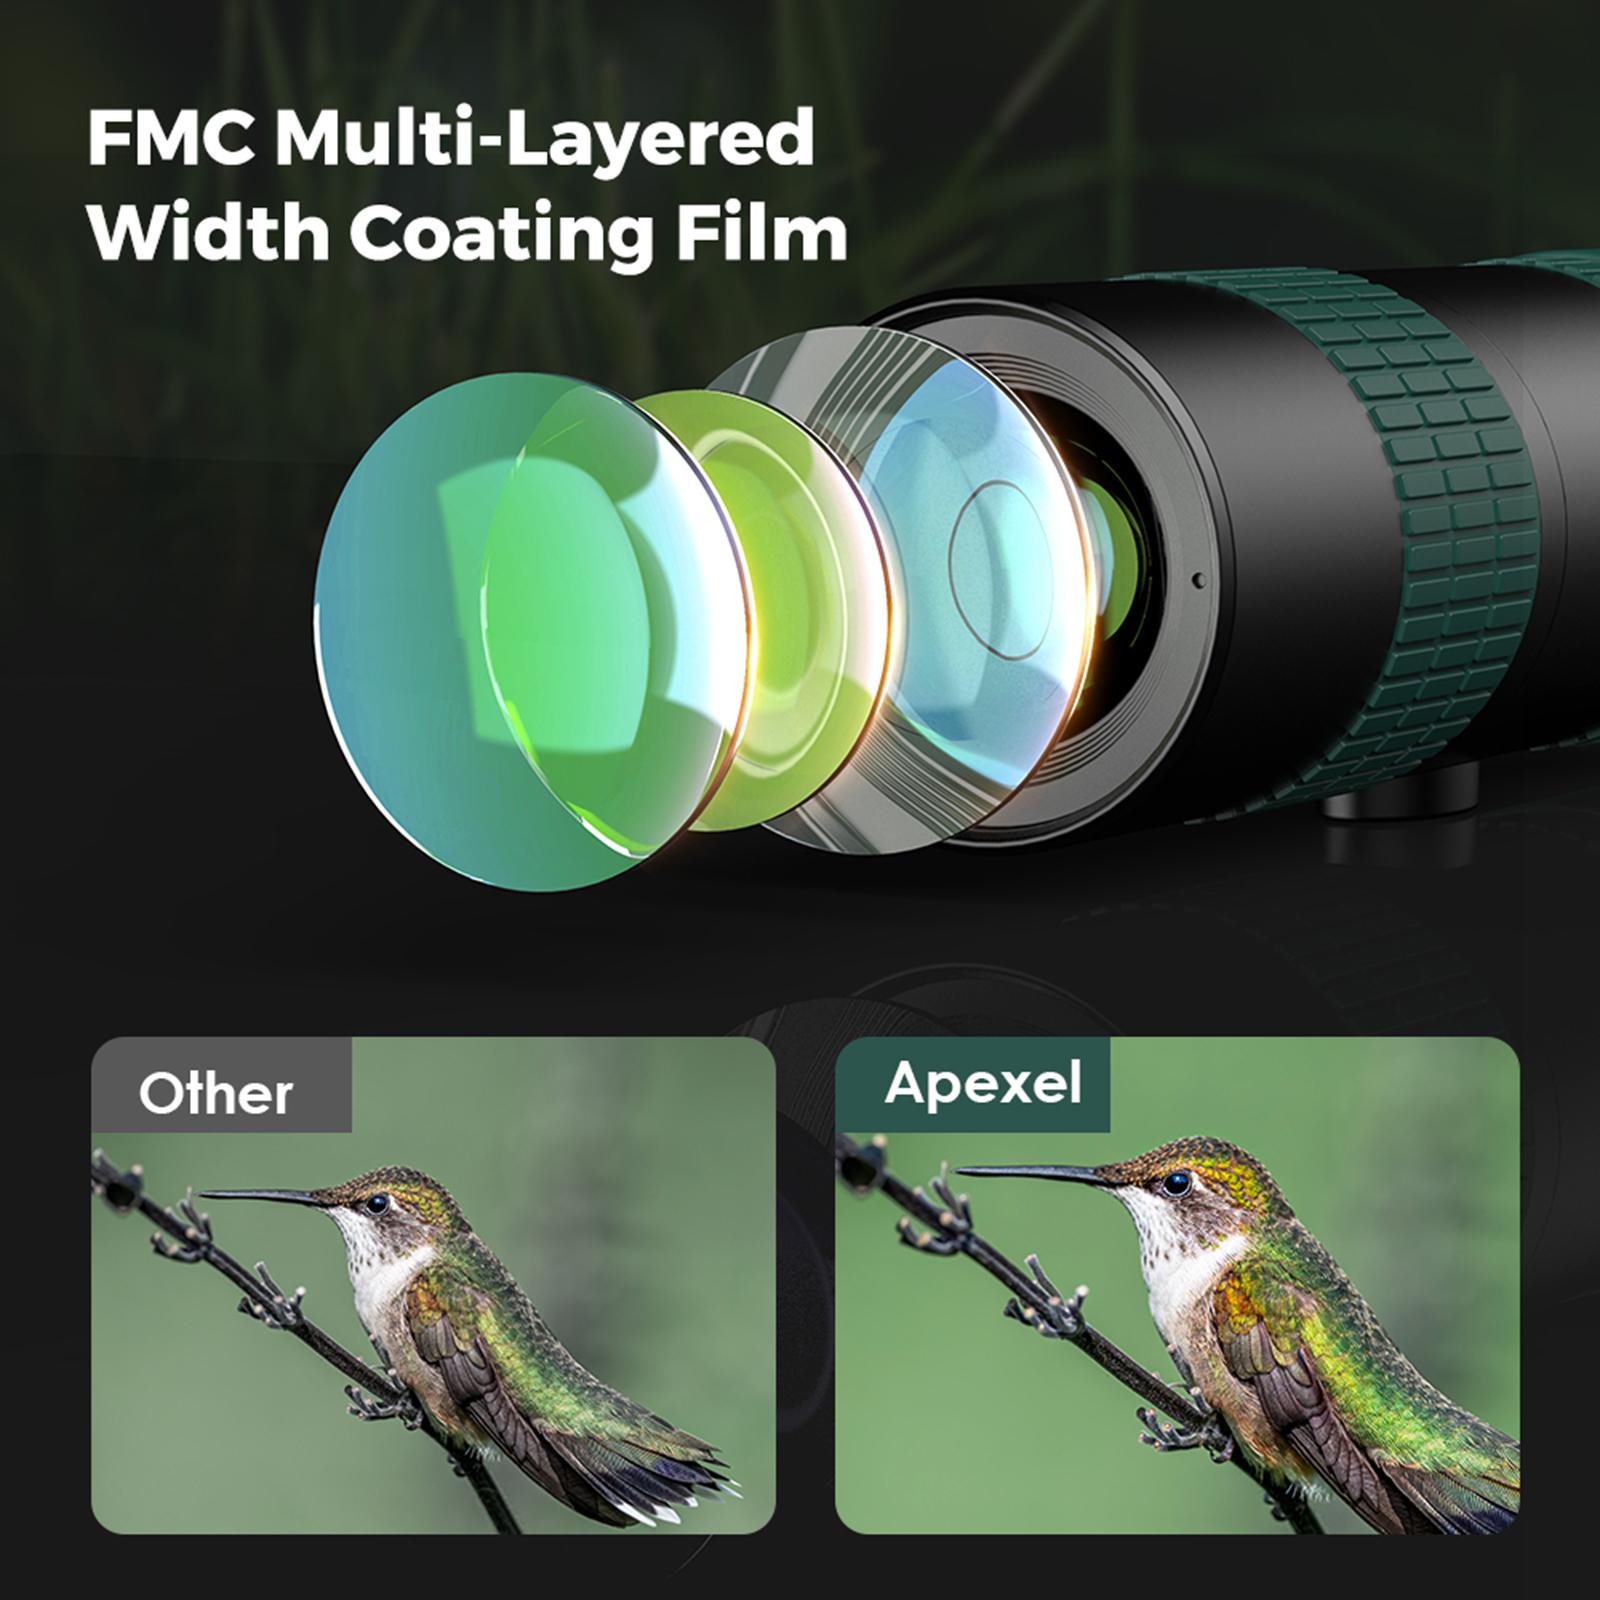 8-24X30 HD Zoom Monocular Scope for Traveling Concert Hiking Telescope Green with Tripod